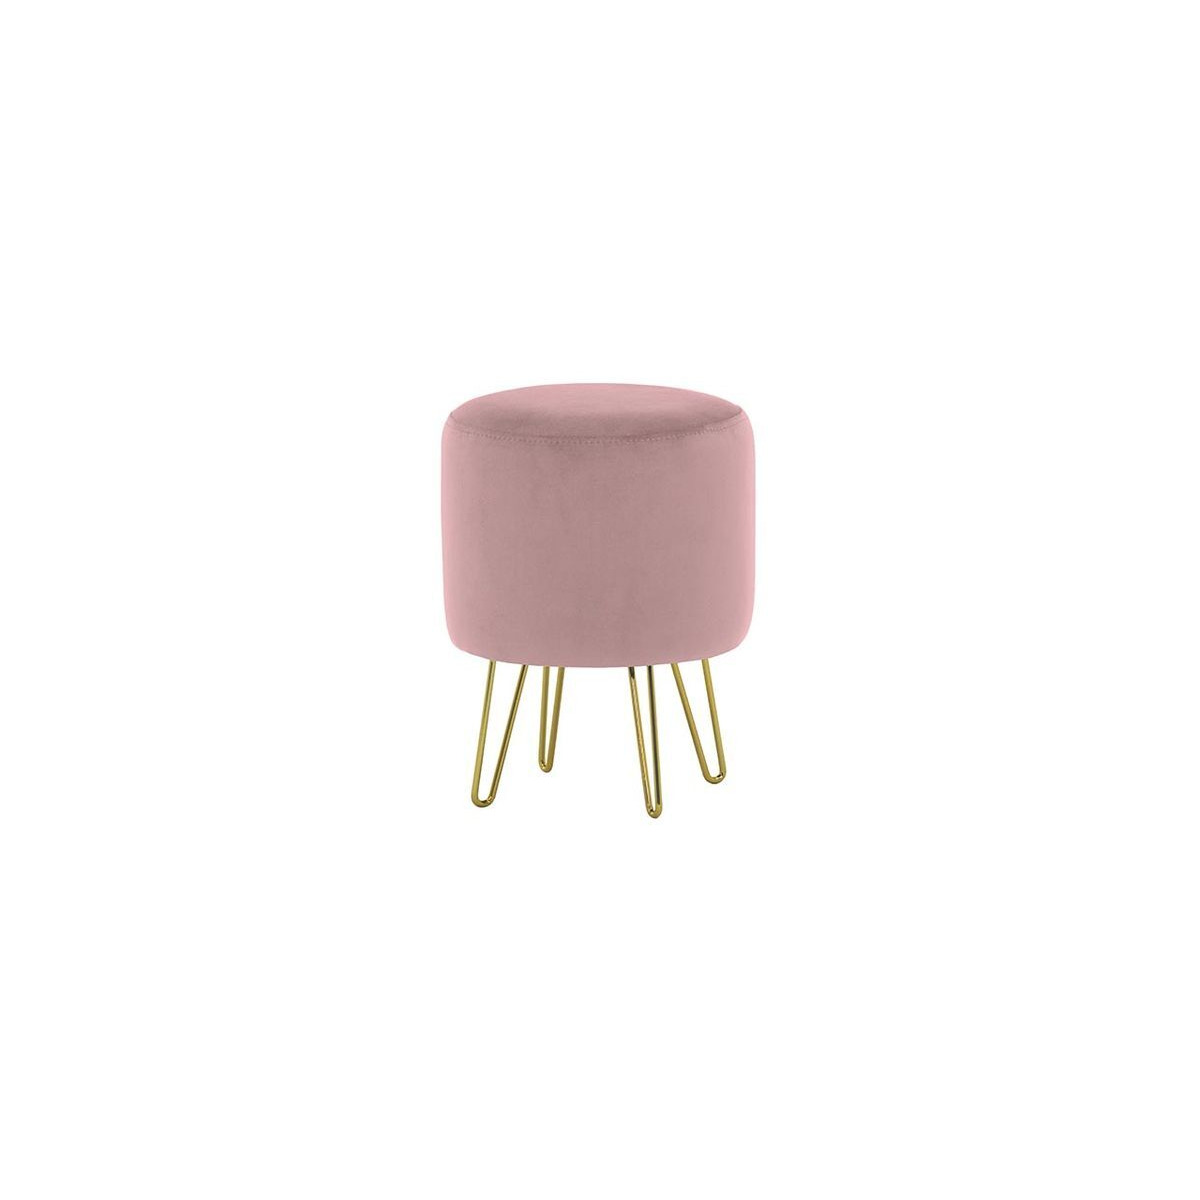 Flair Small Round Pouffe Metal Legs, lilac - image 1